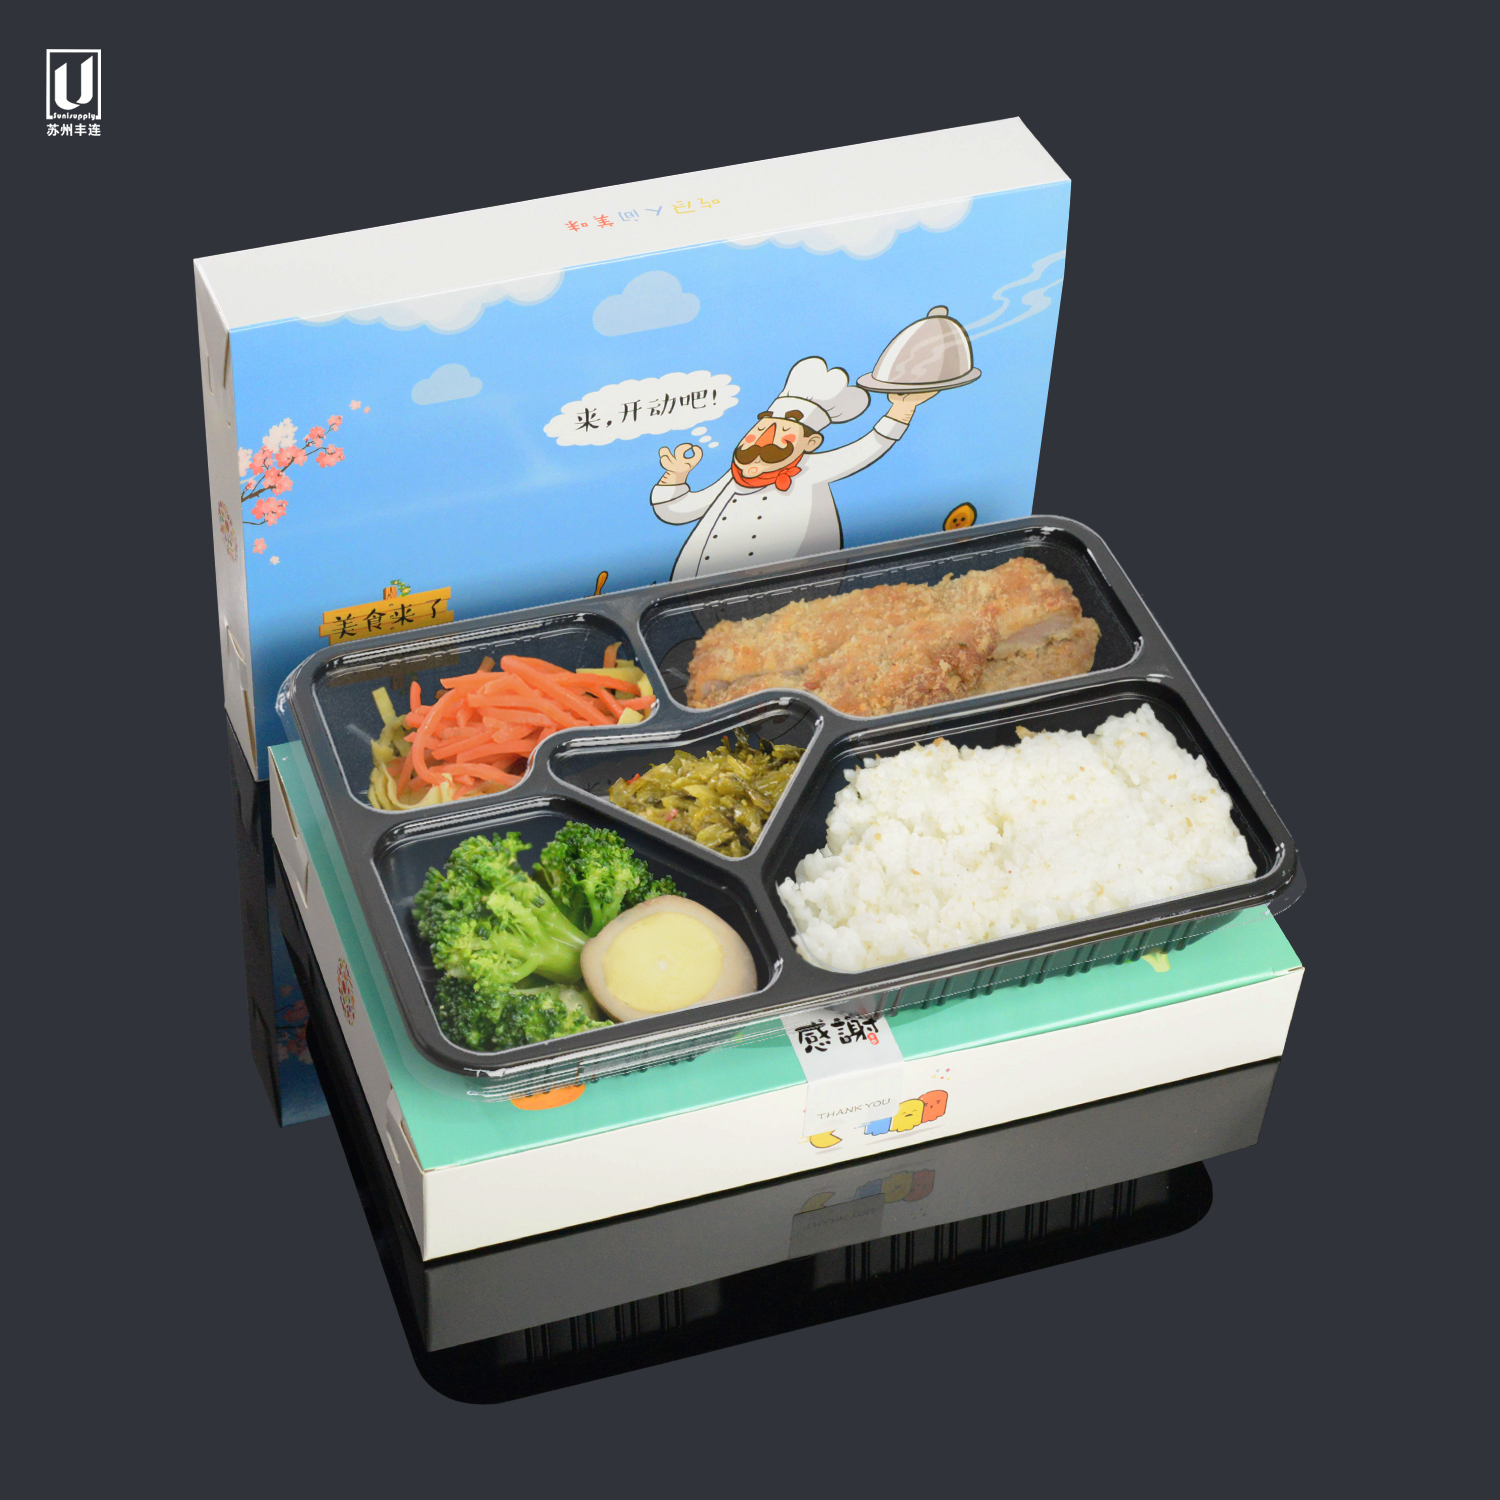 35.65] One-off take-out box, fast food box, carton packing box 